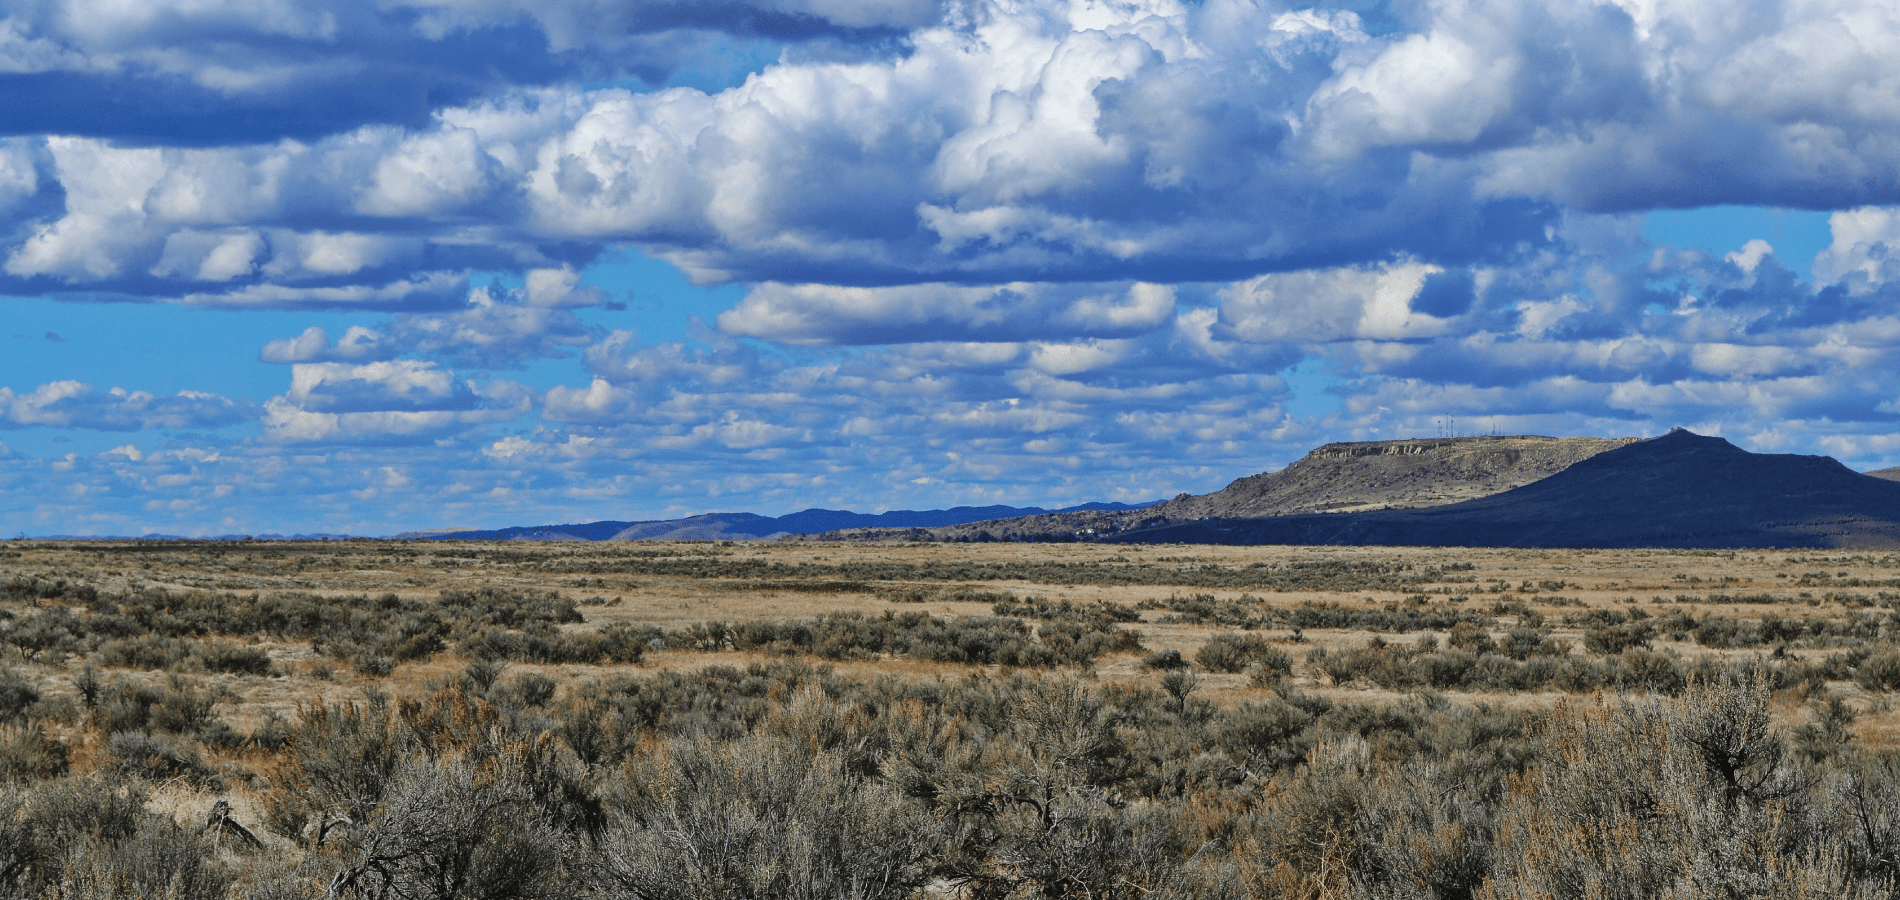 Landscape with clouds and desert